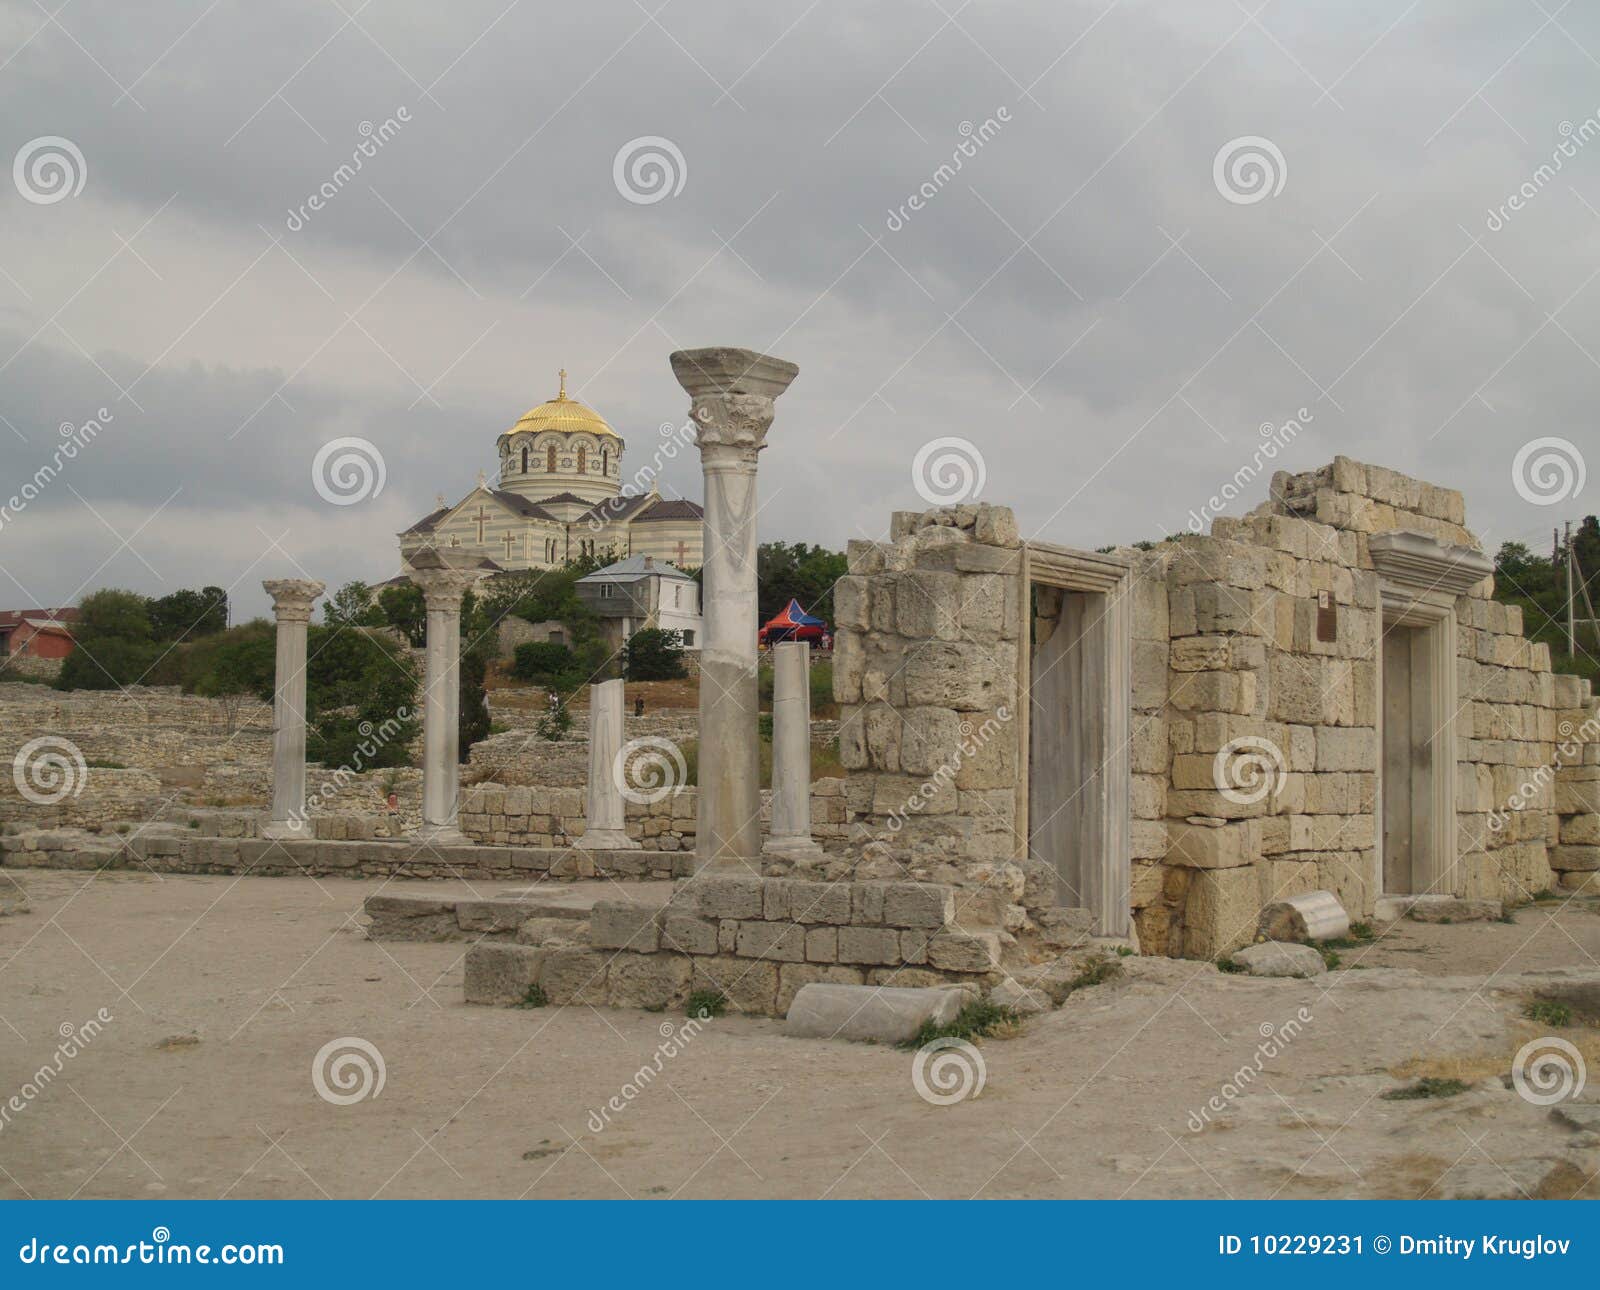 ruins of cathedral in hersones, crimea,